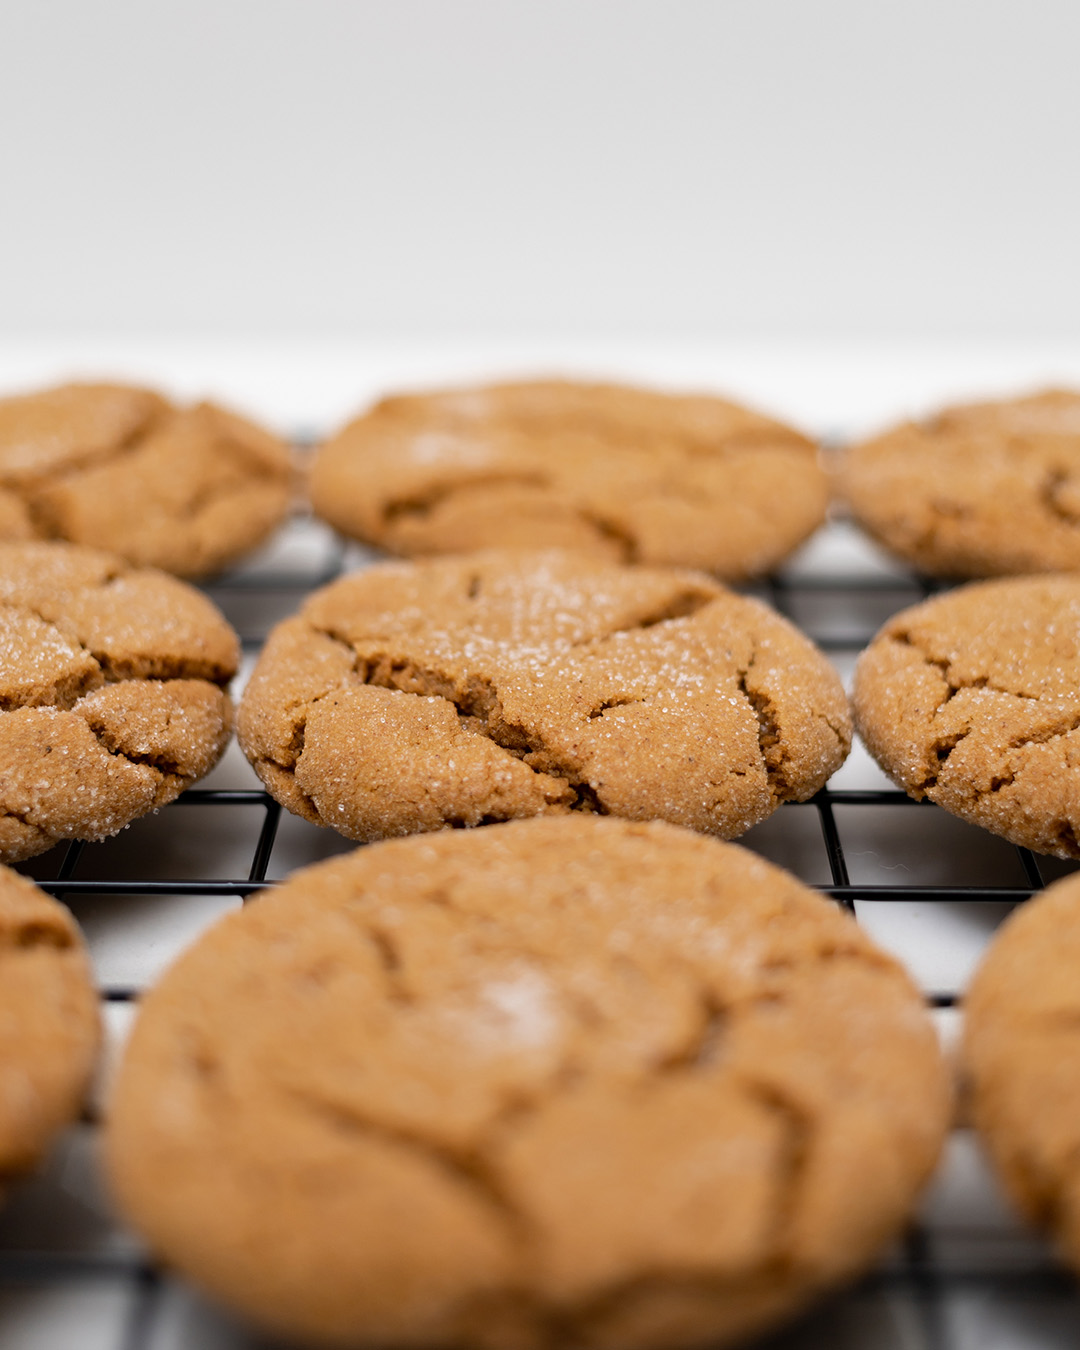 Such a classic cookie! In my opinion, it's definitely important to have a good ginger molasses cookie recipe in your bag of tricks.